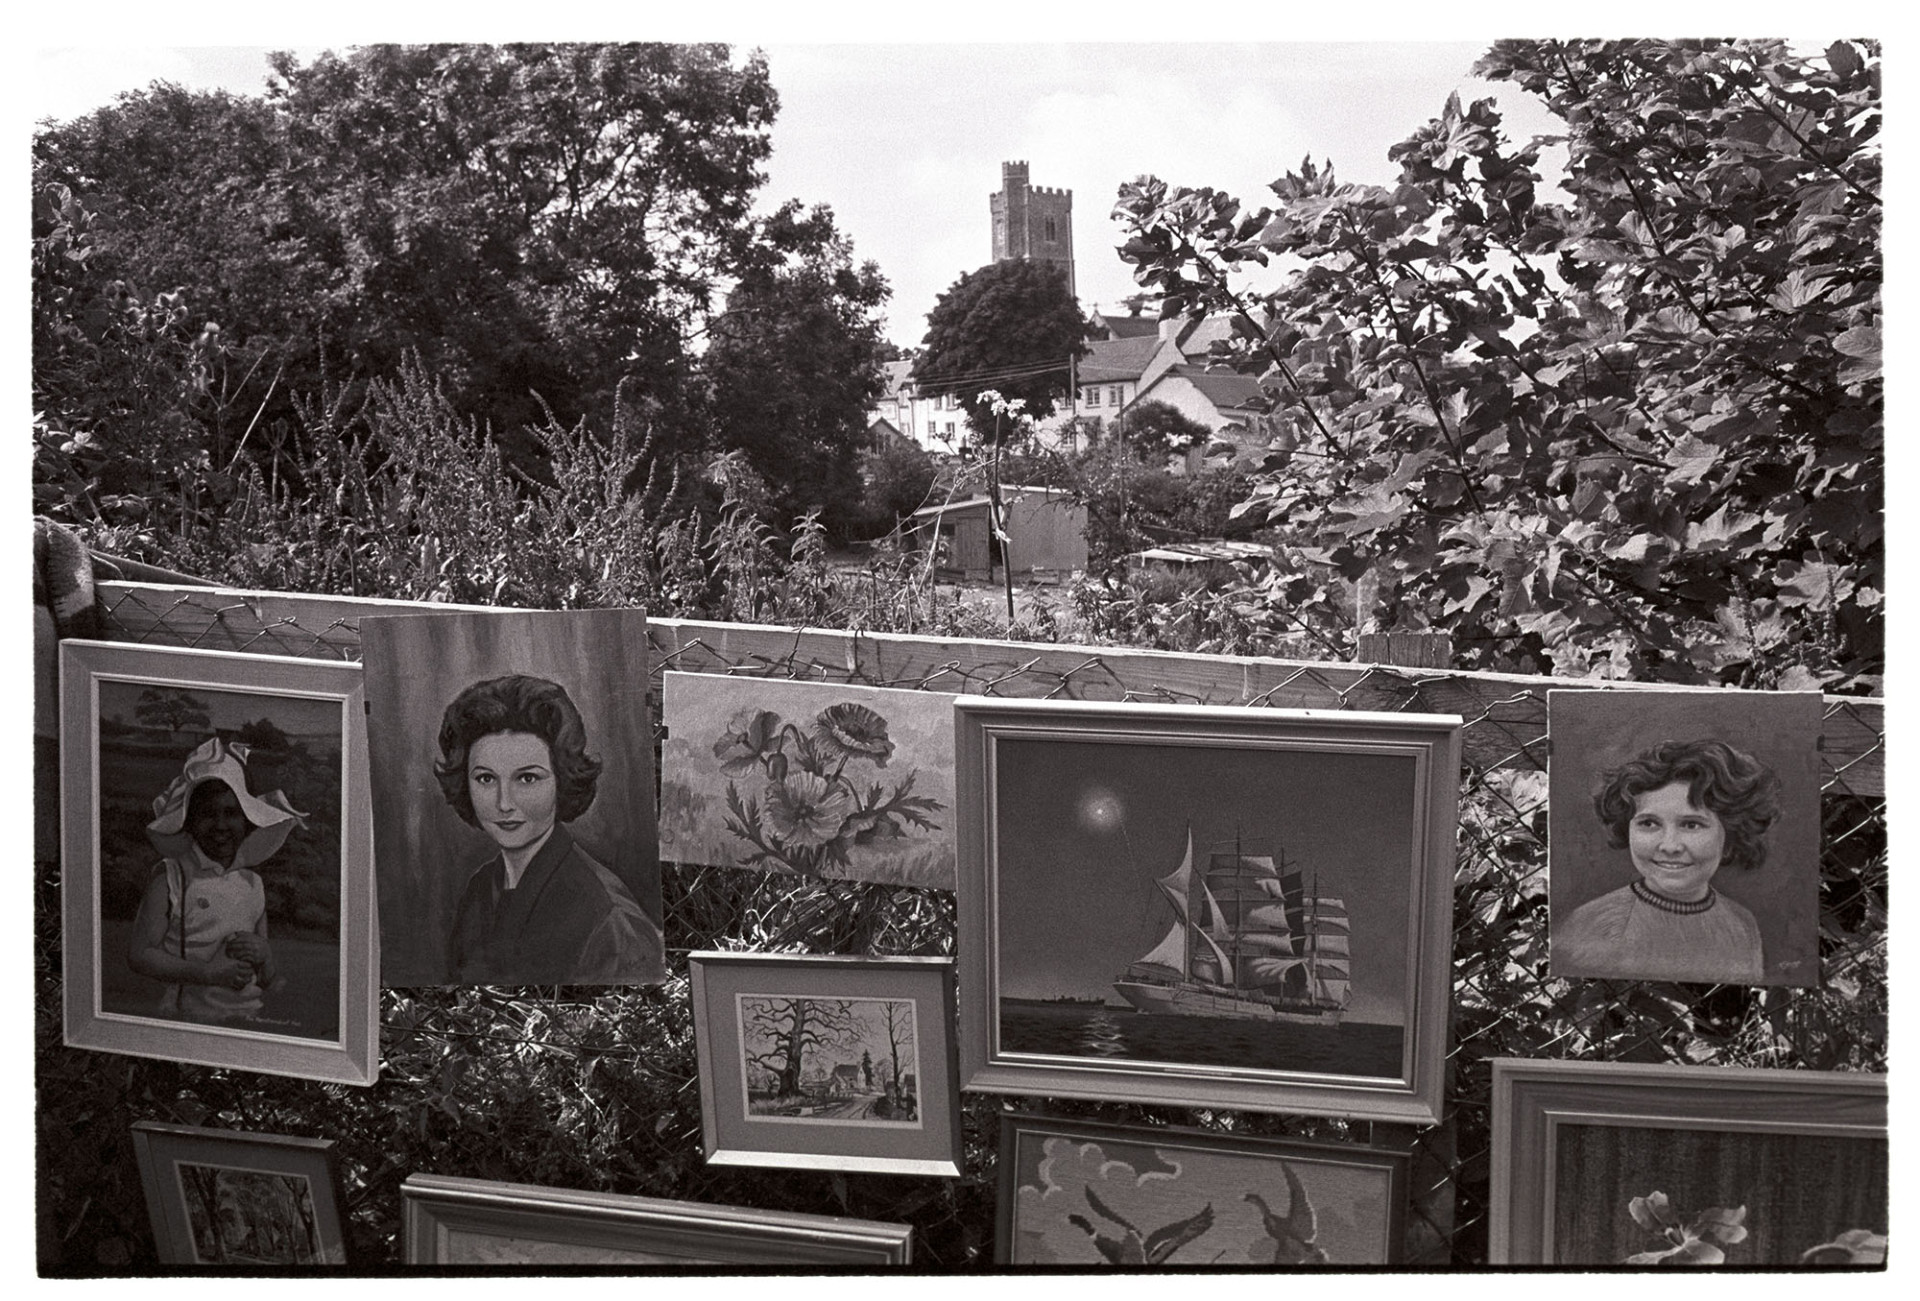 Paintings on show at  fete. 
[Paintings and portraits tied to a fence at the village fete in Atherington. The church and houses are visible in the background.]